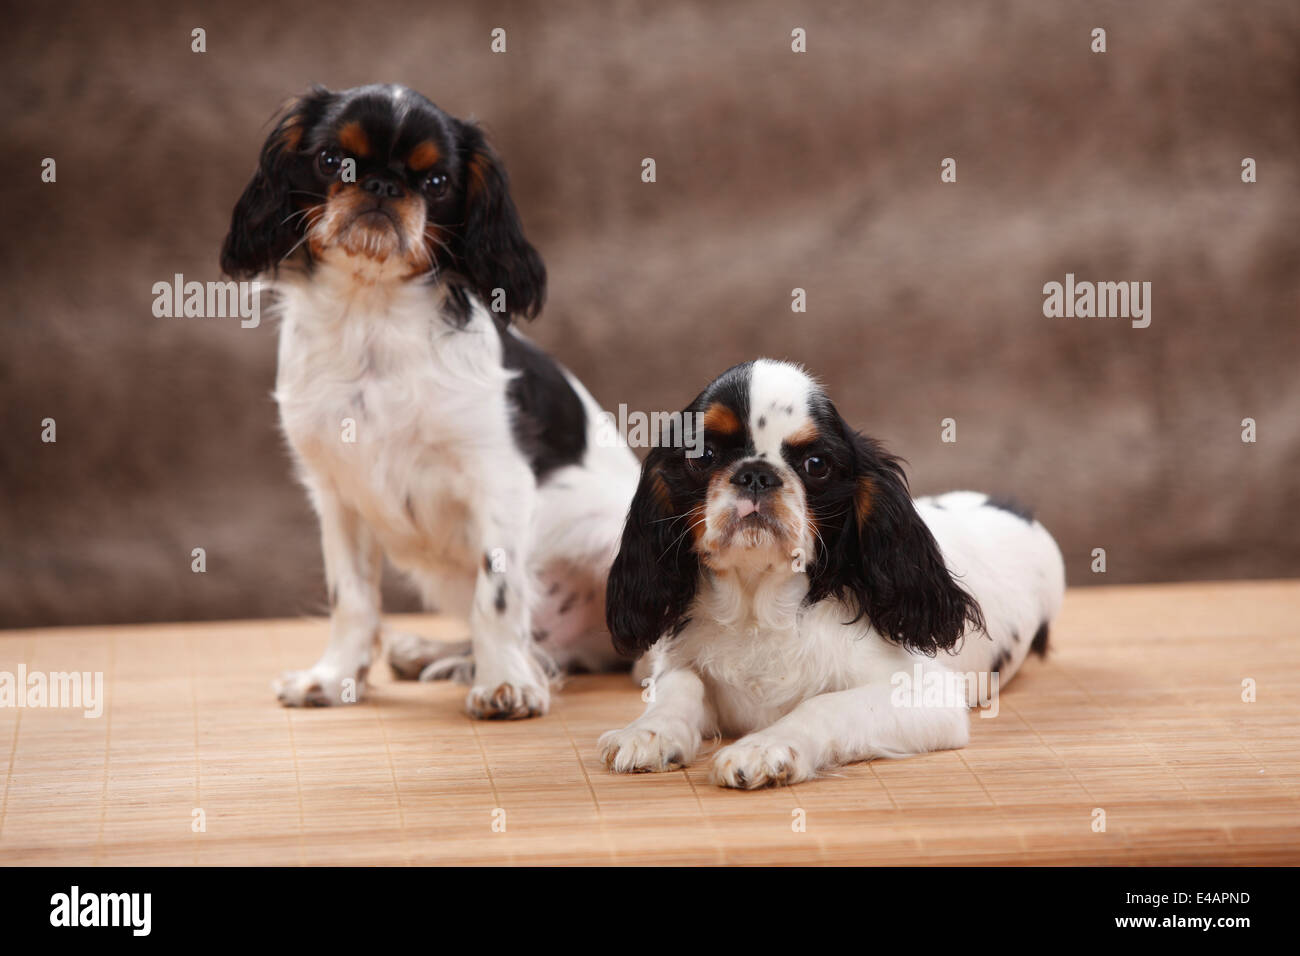 King Charles Spaniel, hommes, tricolore, 6 mois|King Charles Spaniel, Rueden, tricolore, 6 Monate / Jungruede Banque D'Images